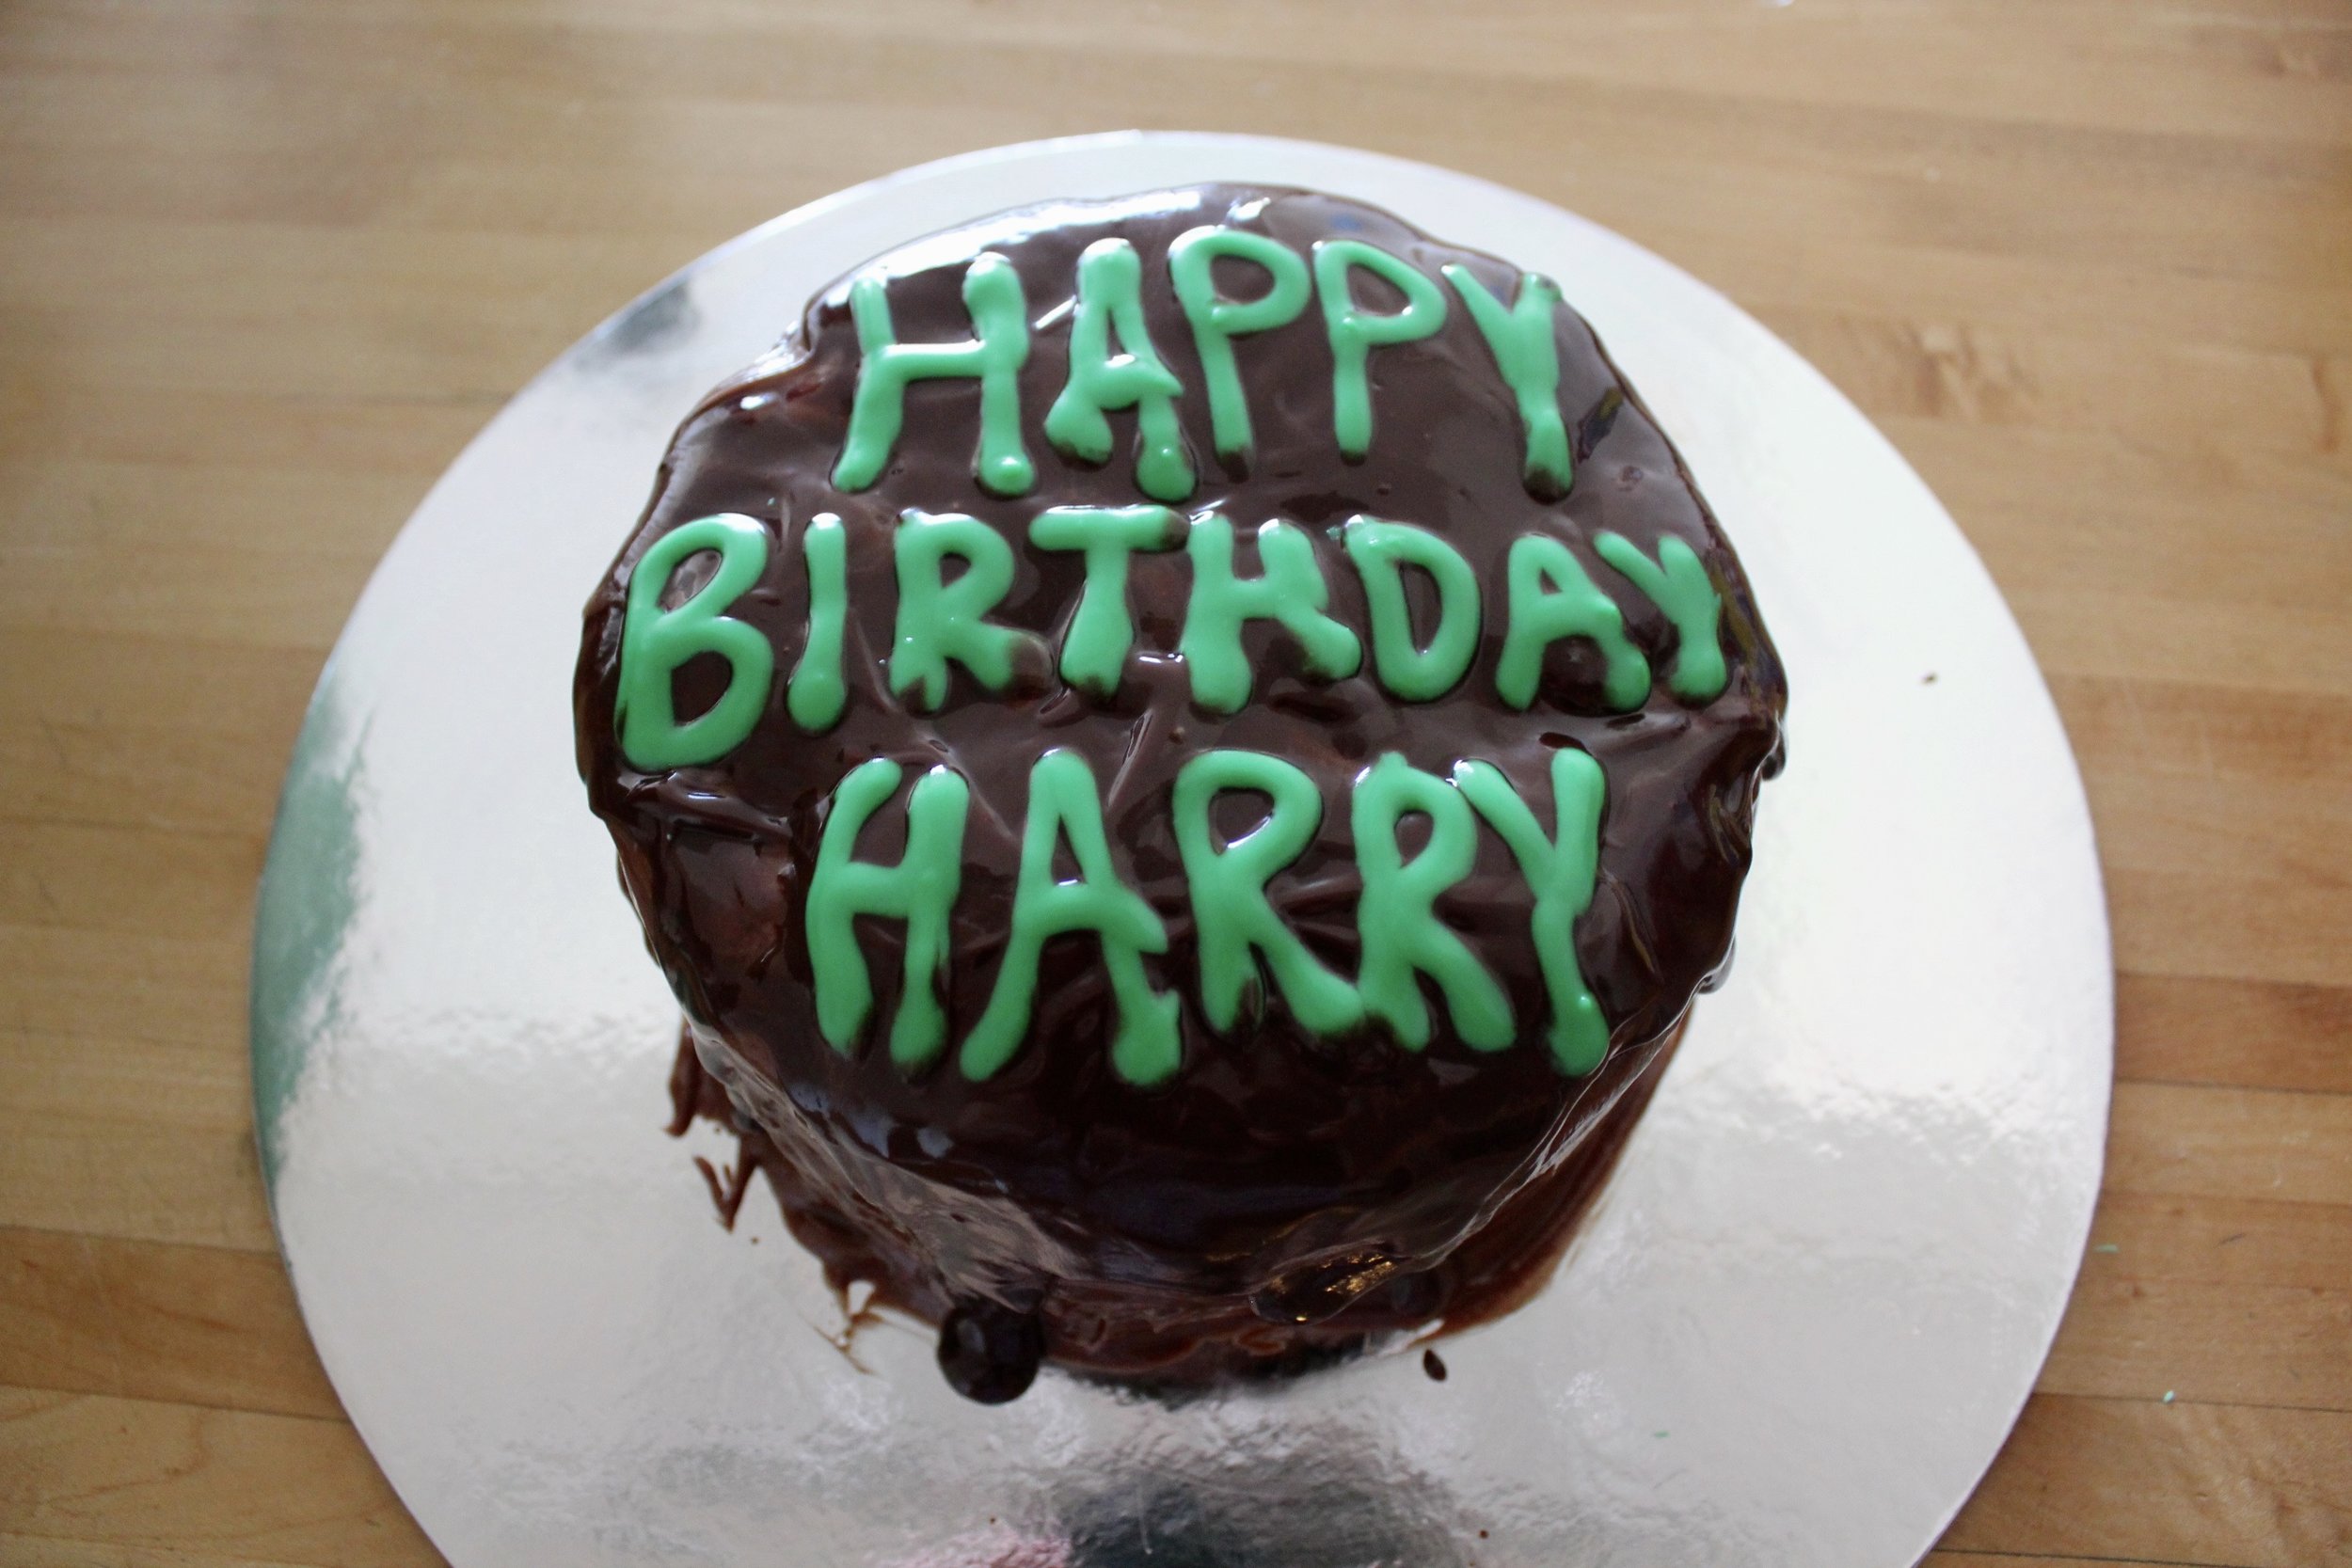 Hagrid S 11th Birthday Cake For Harry Harry Potter And The Sorcerer S Stone Book Tv Dinner